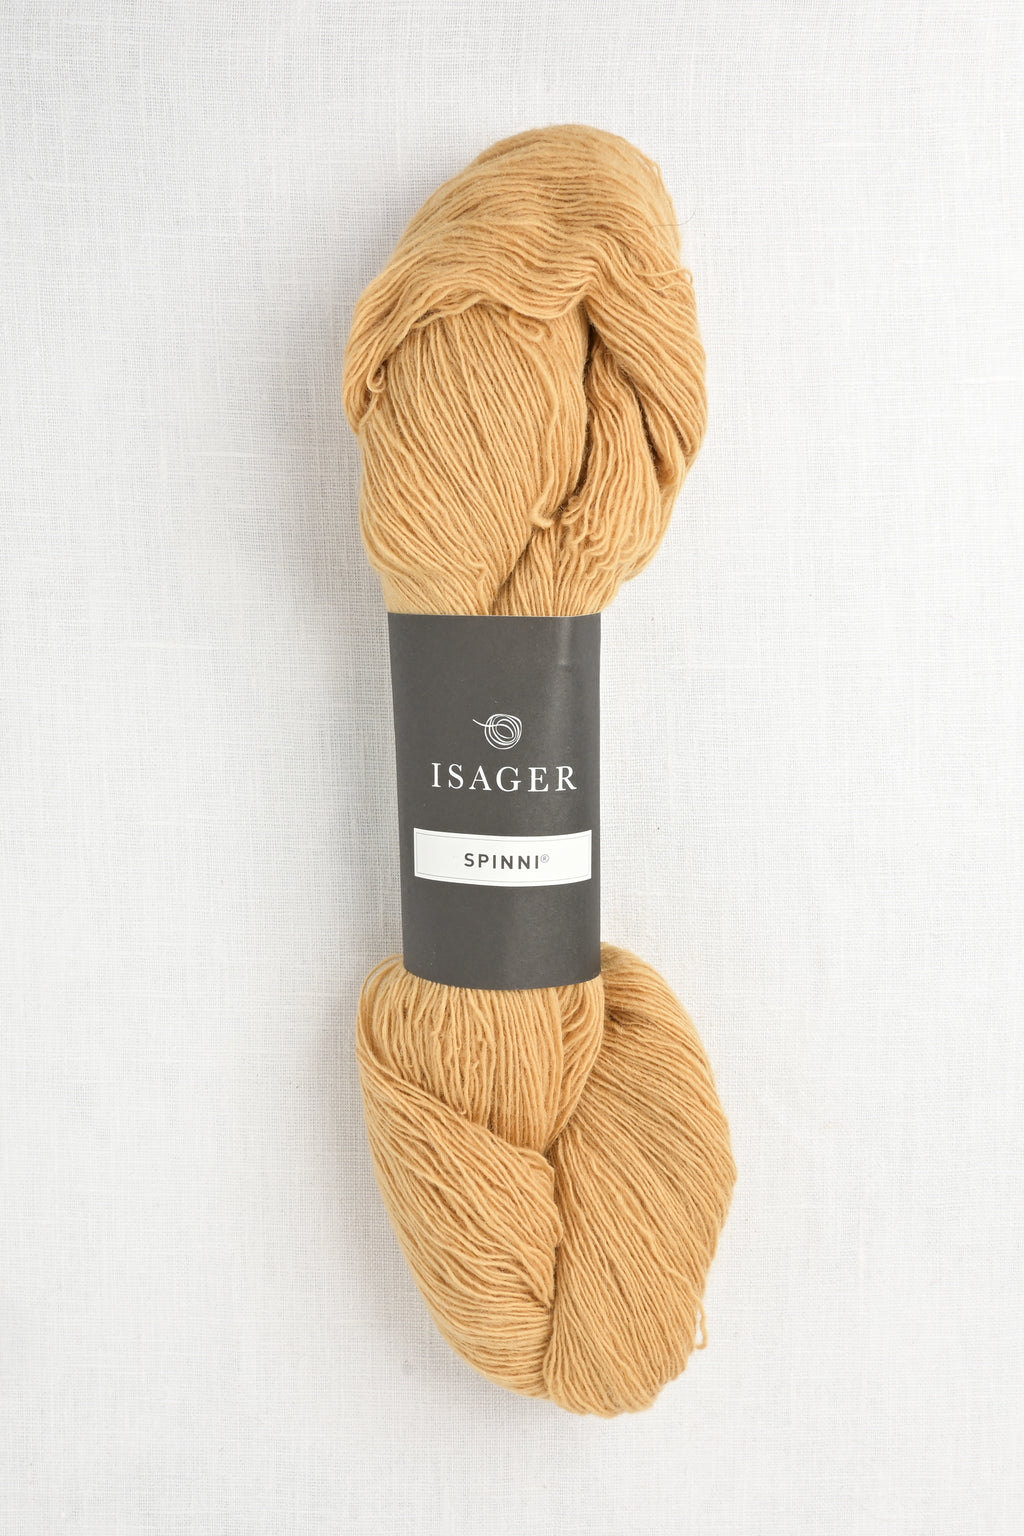 isager spinni 59 bale 100g